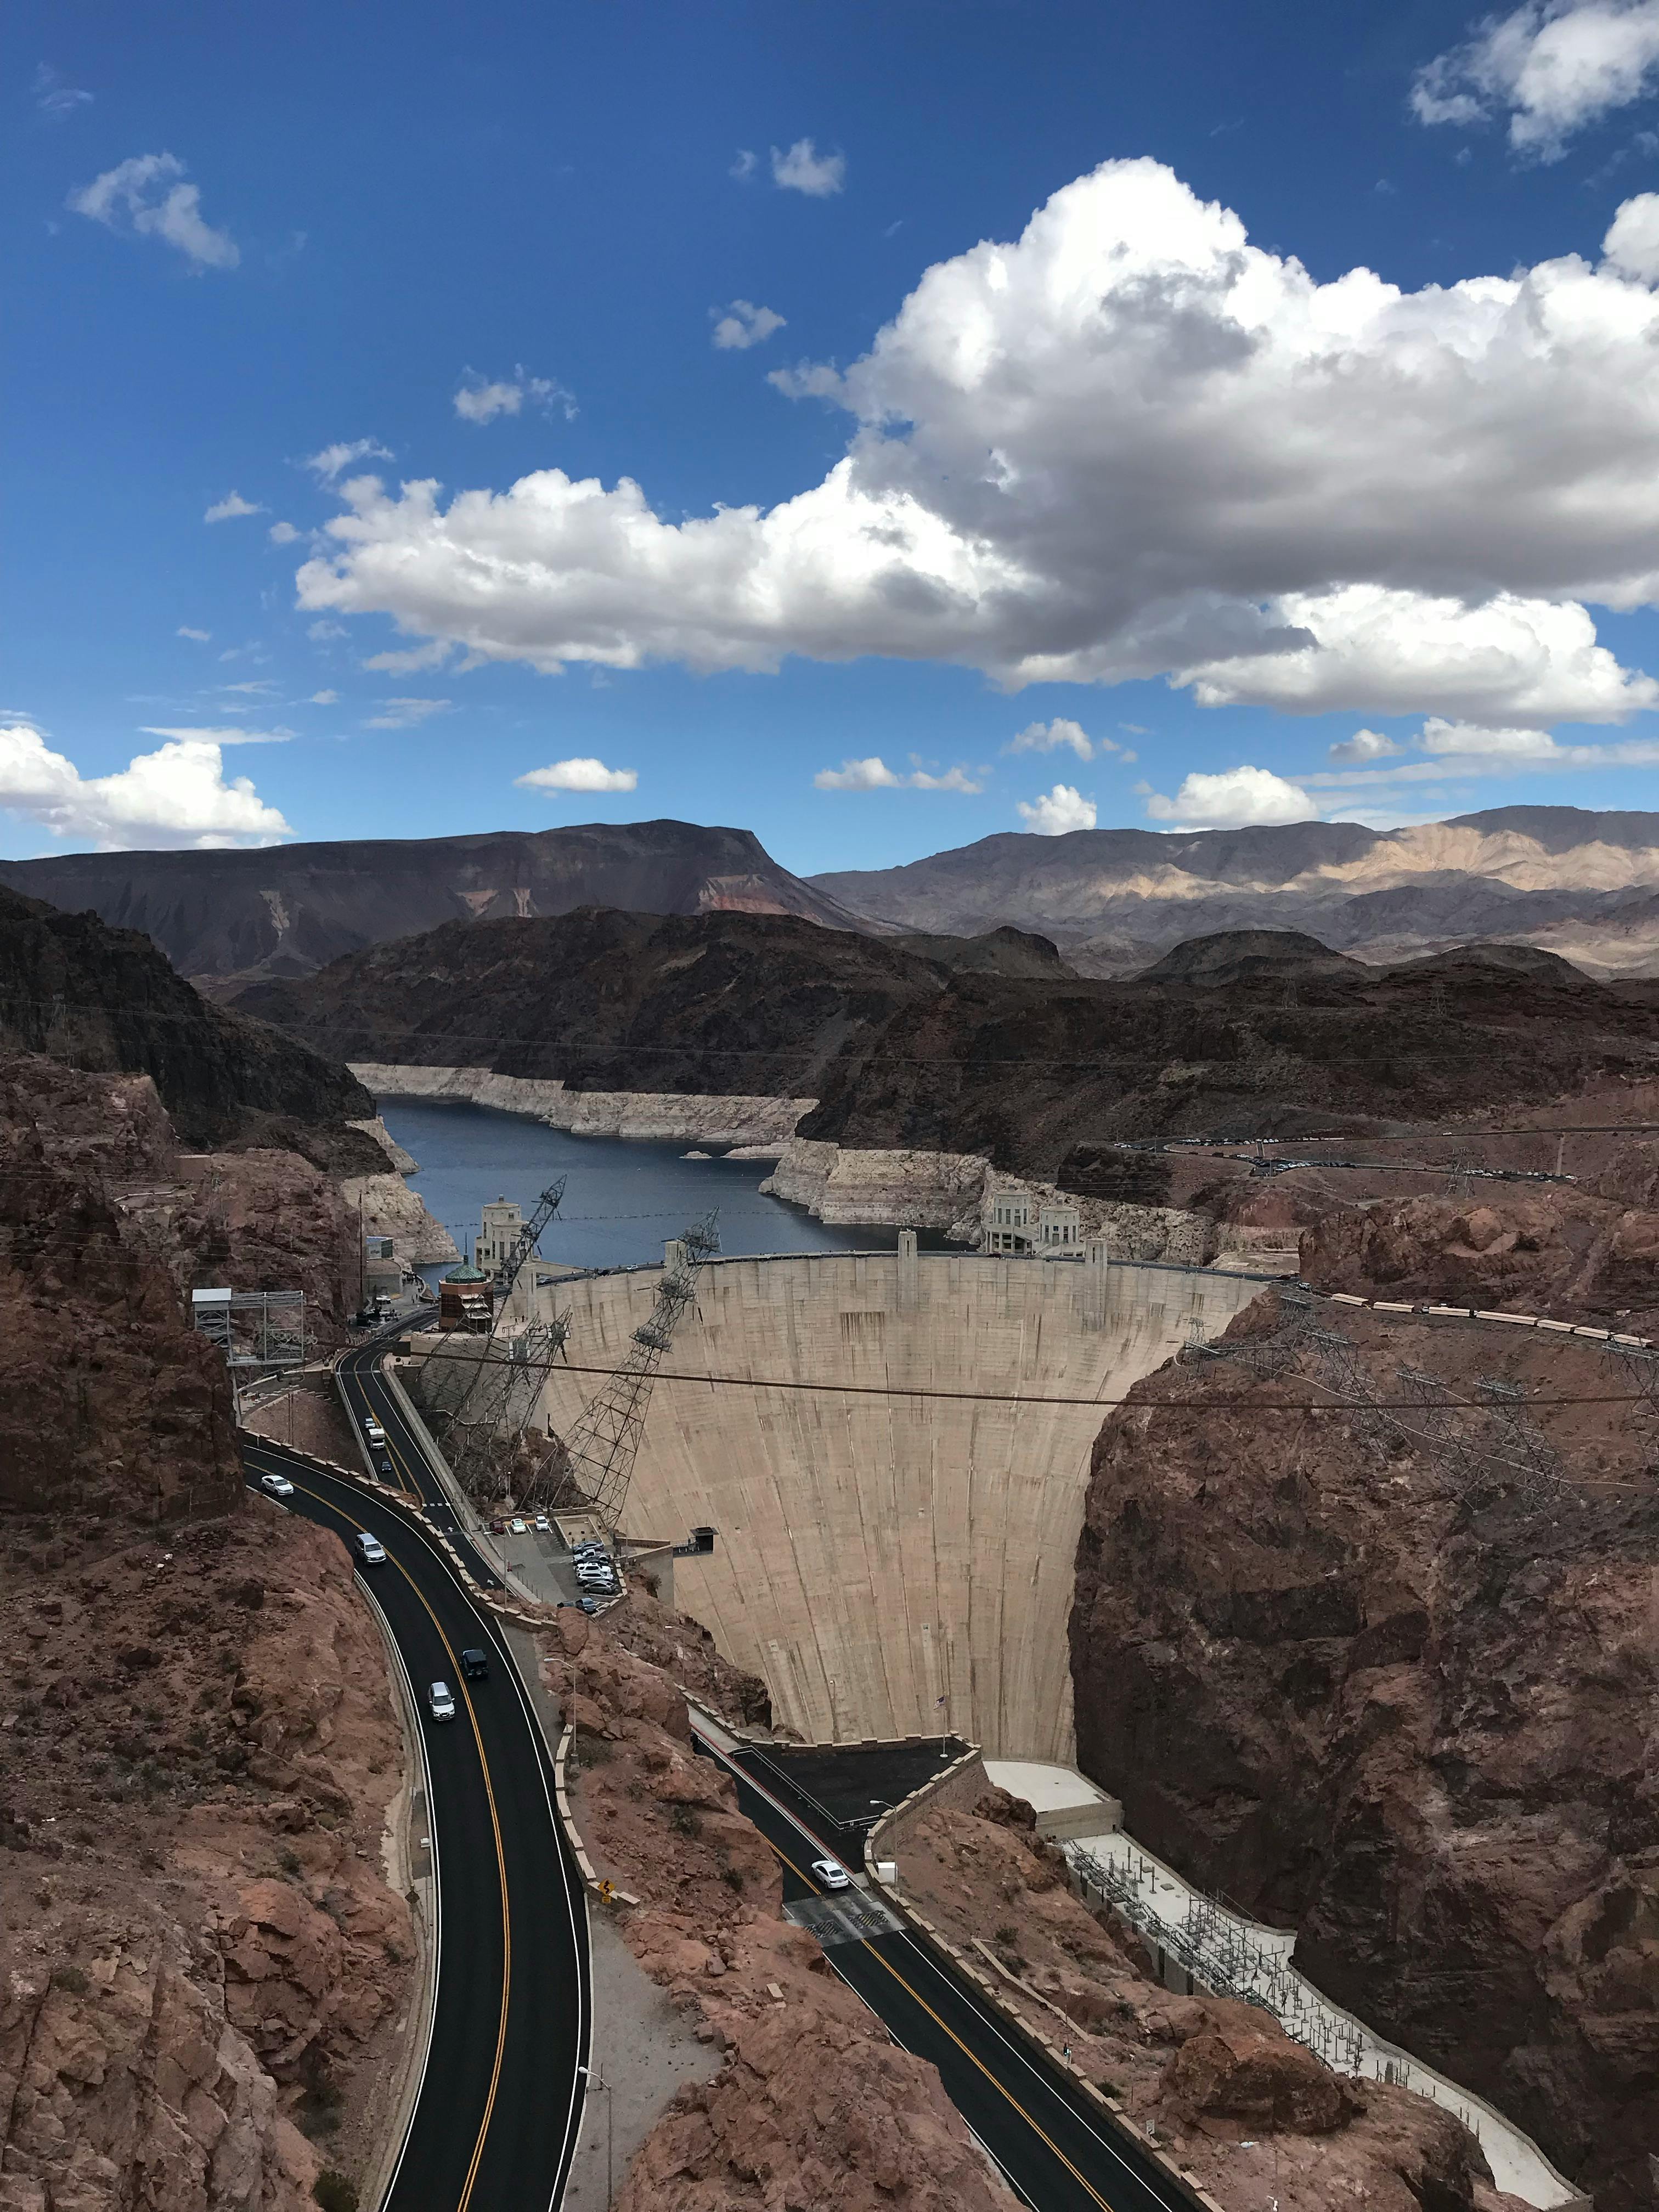 hoover dam under blue sky and white clouds